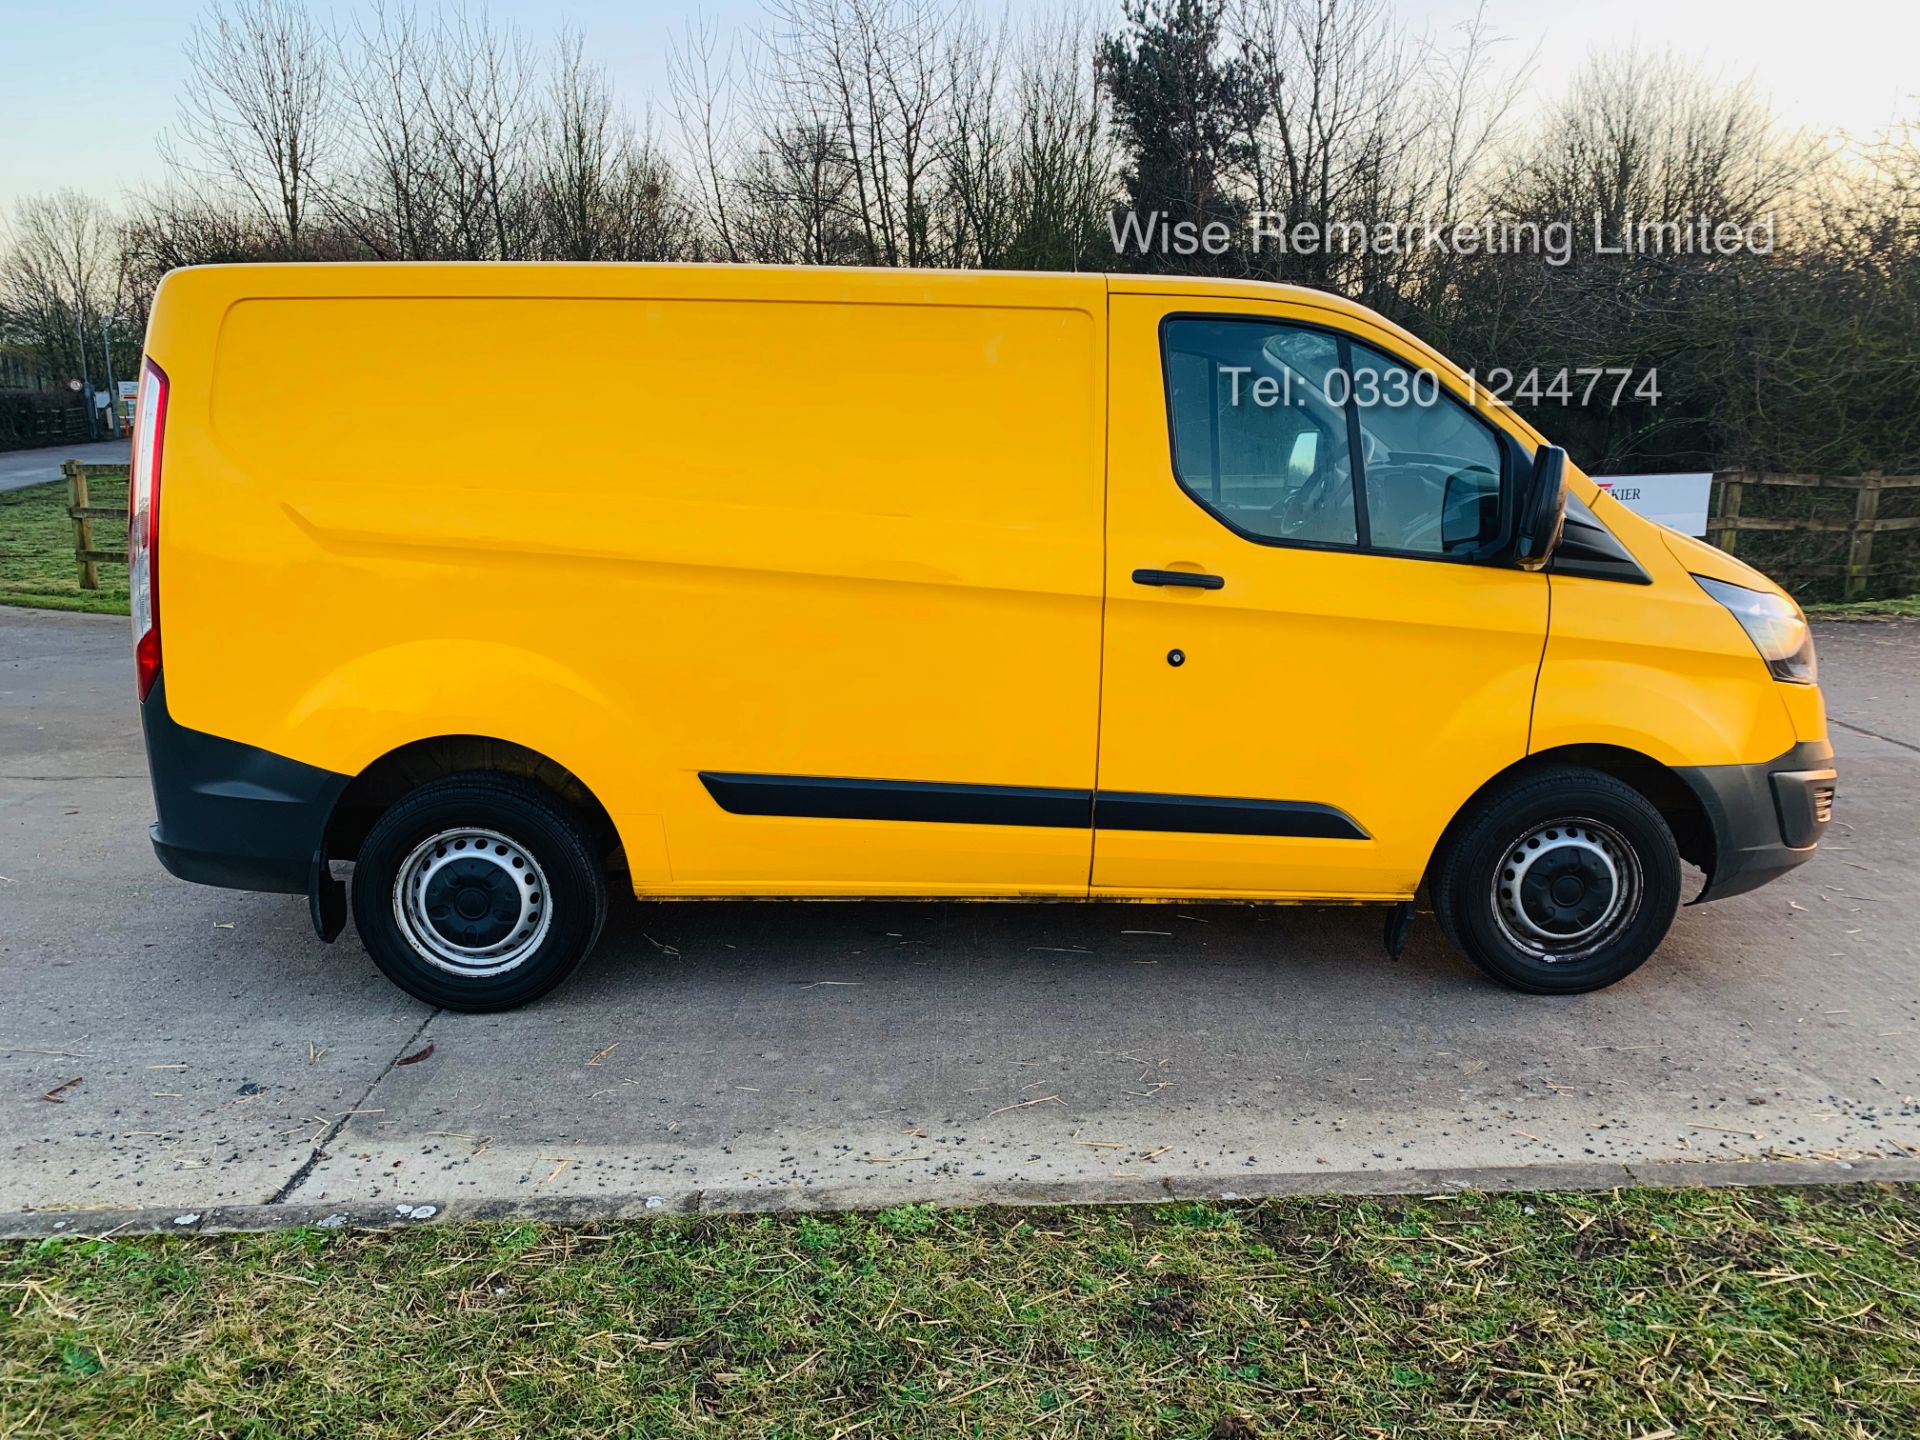 (RESERVE MET) Ford Transit Custom 2.2 TDCI 310 Eco-Tech - 2016 Model - 1 Keeper From New - Air Con - - Image 5 of 23